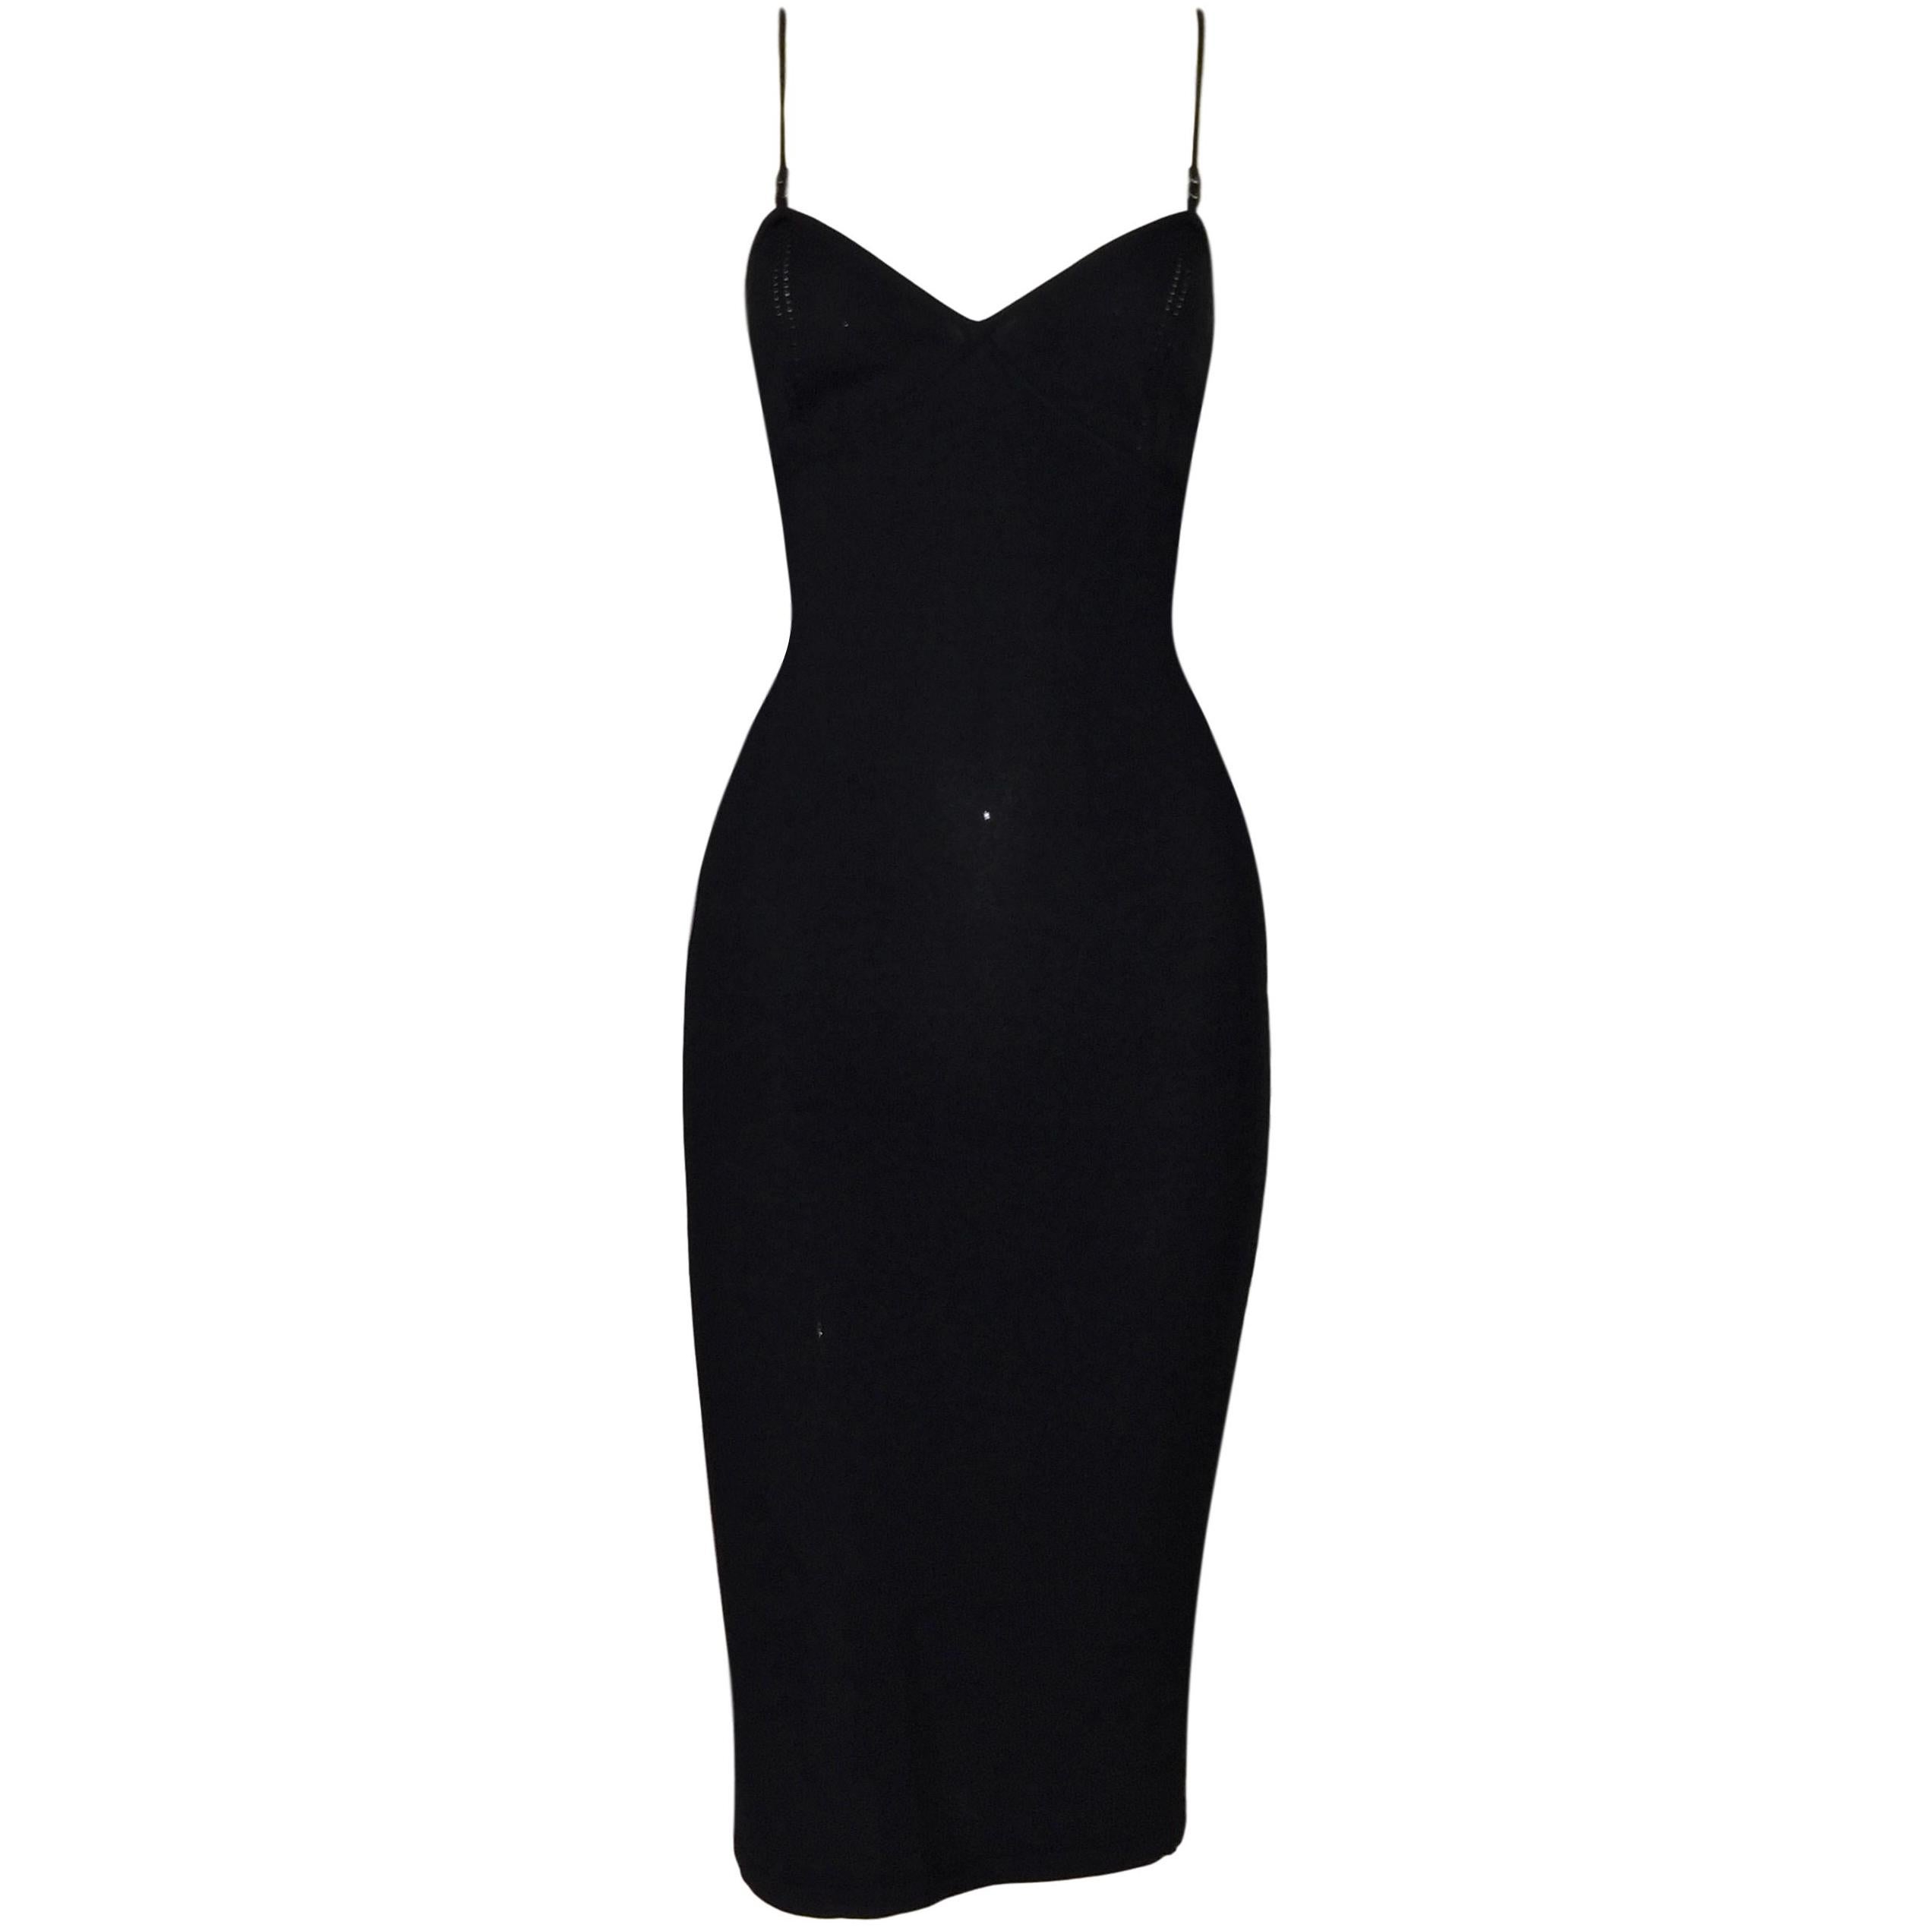 1999 Gucci by Tom Ford Black Plunging Knit Bodycon Dress